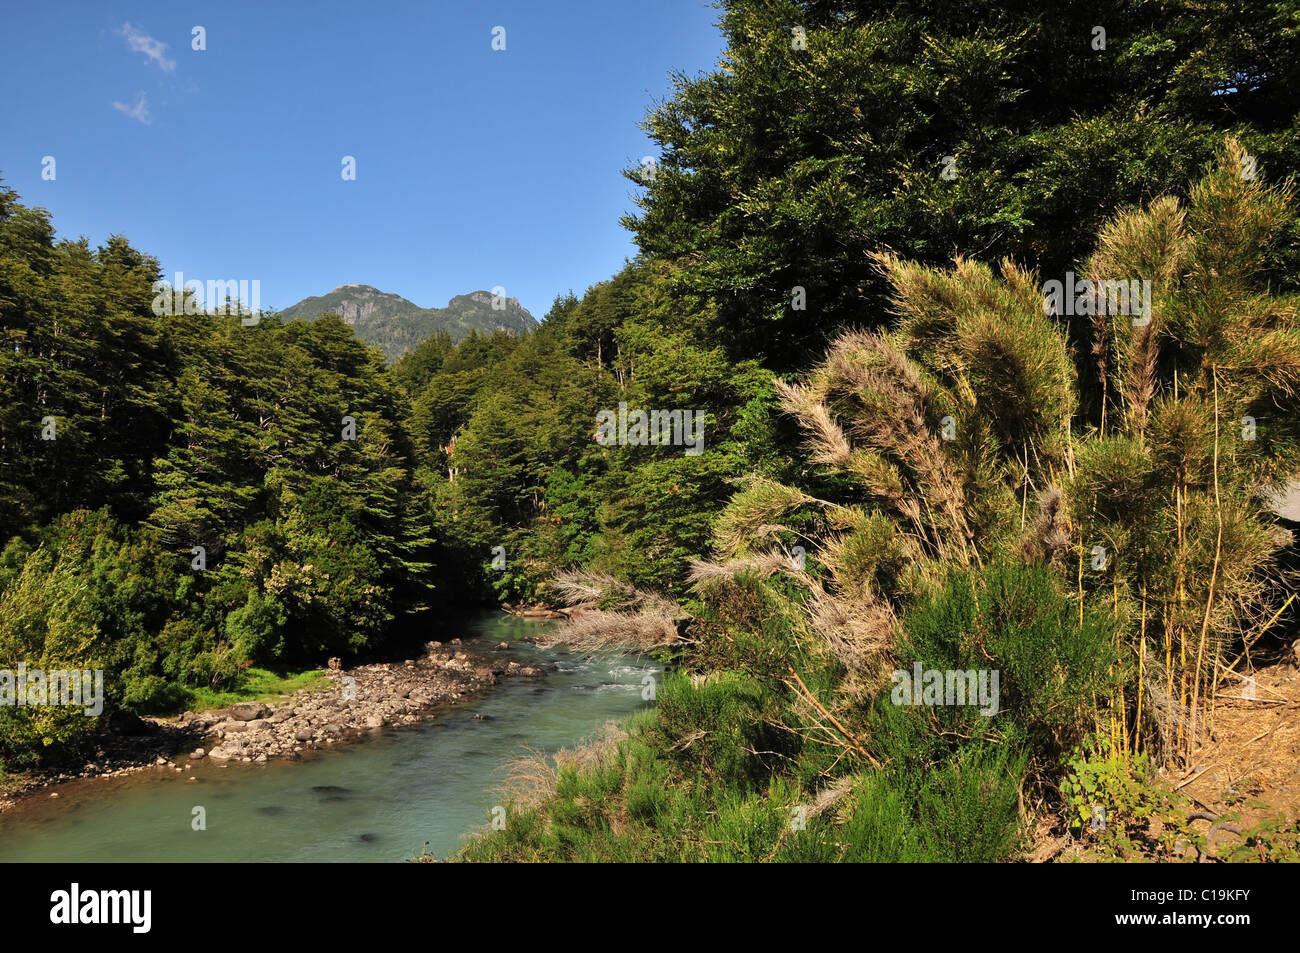 Blue sky Andean view of opaque milky water of Rio Frias flowing through forest trees with bamboo, Puerto Blest, Andes, Argentina Stock Photo